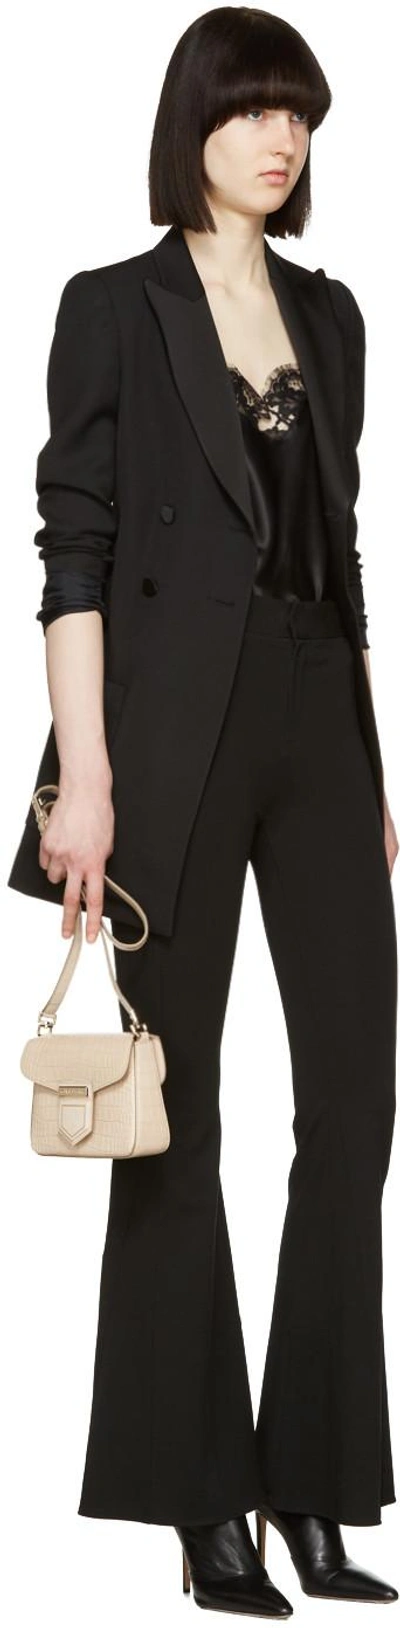 Shop Givenchy Black Flared Trousers